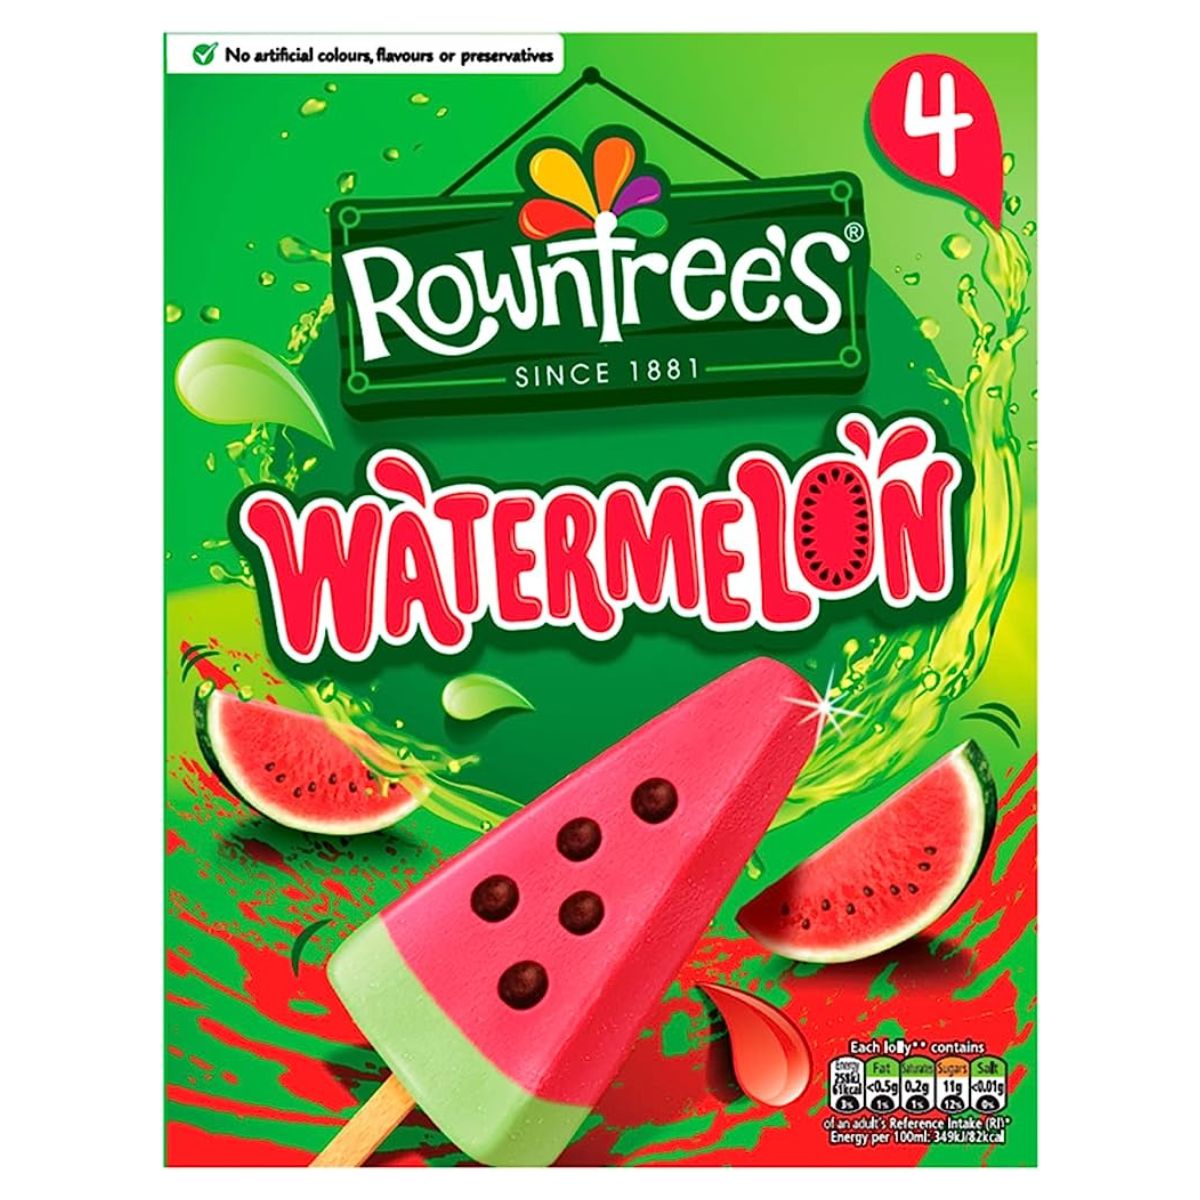 A box of Rowntrees - Watermelon - 4 x 67g with a lollipop on it.